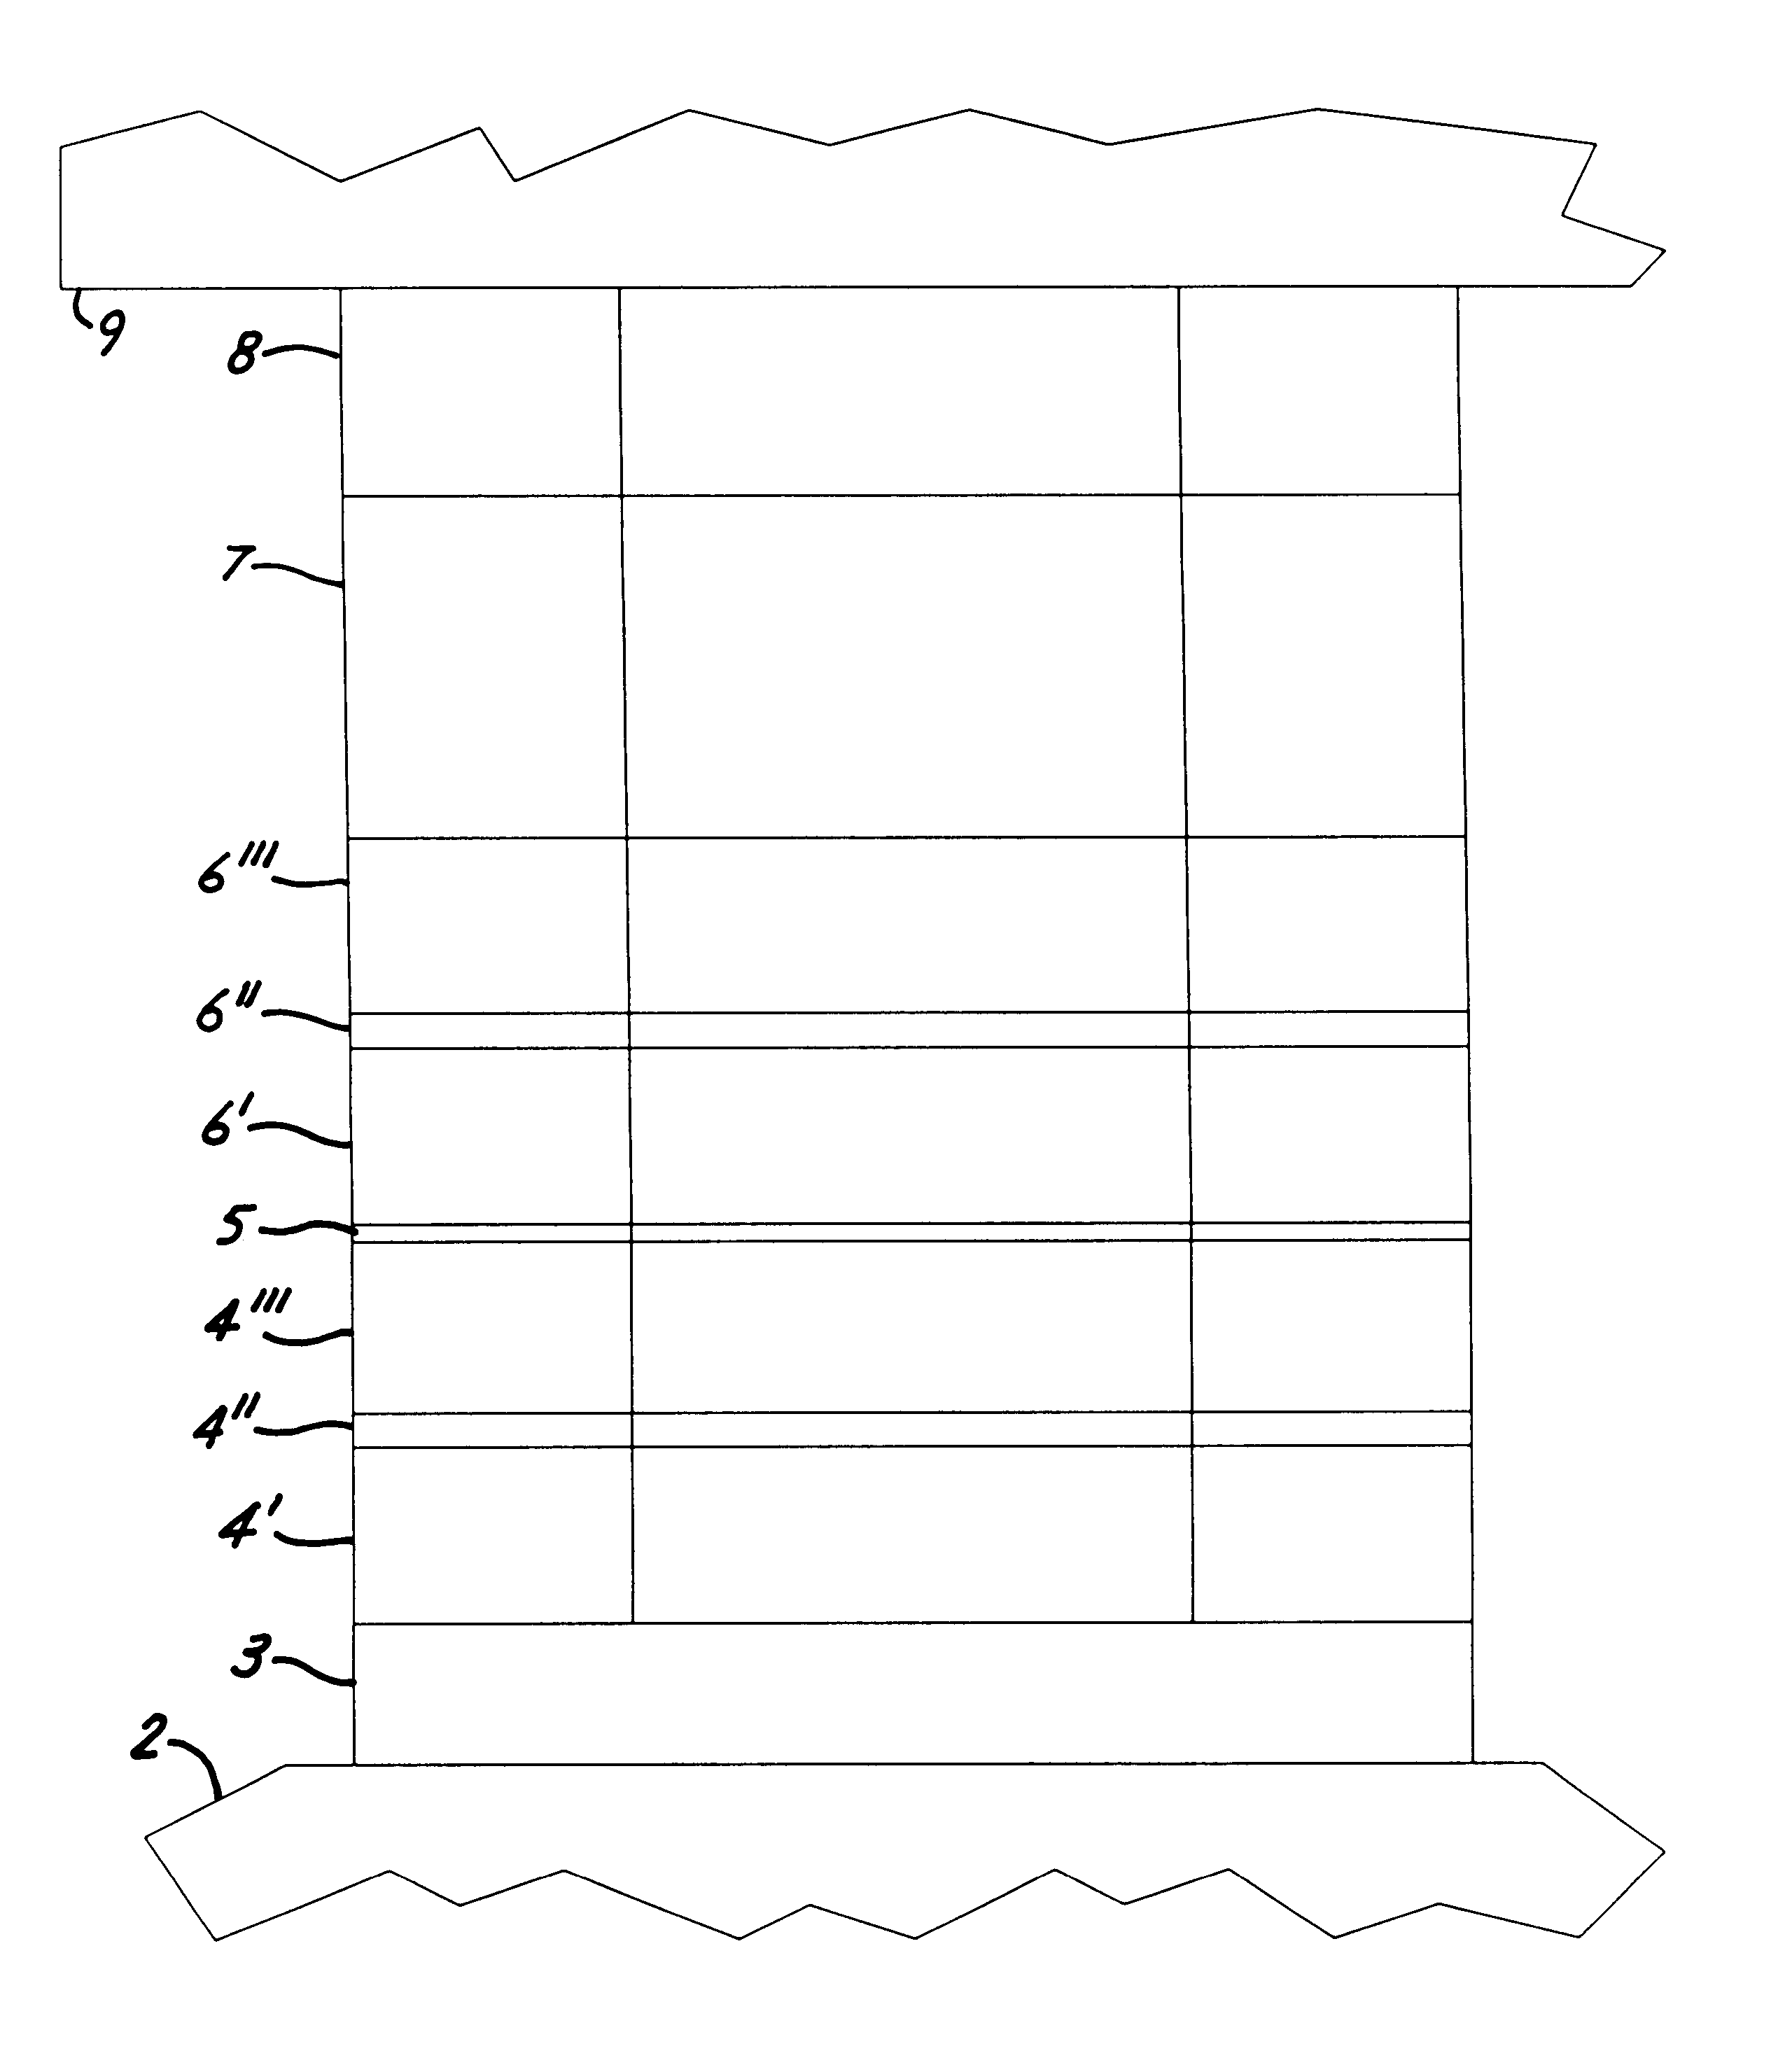 Current switched magnetoresistive memory cell